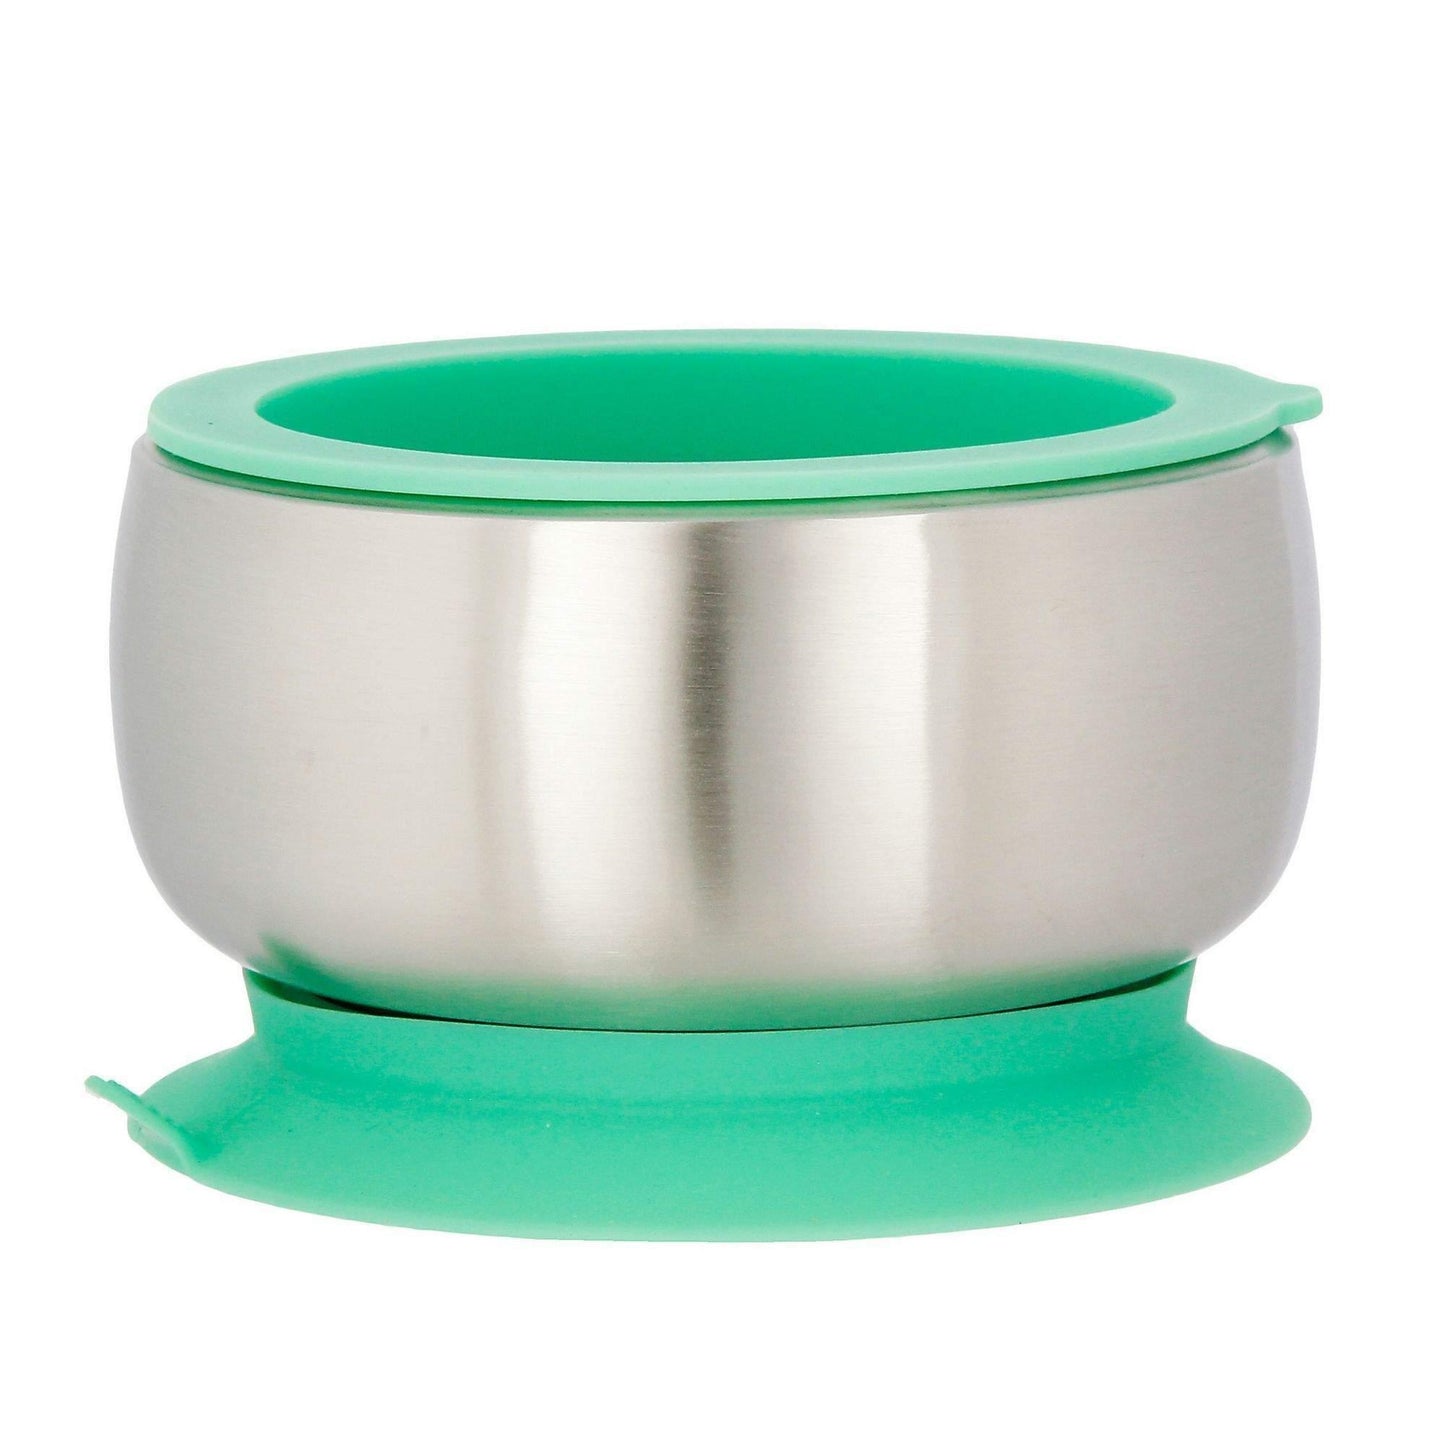 Avanchy Stainless Steel Suction Baby Bowl + Air Tight Lid - Green - Traveling Tikes 